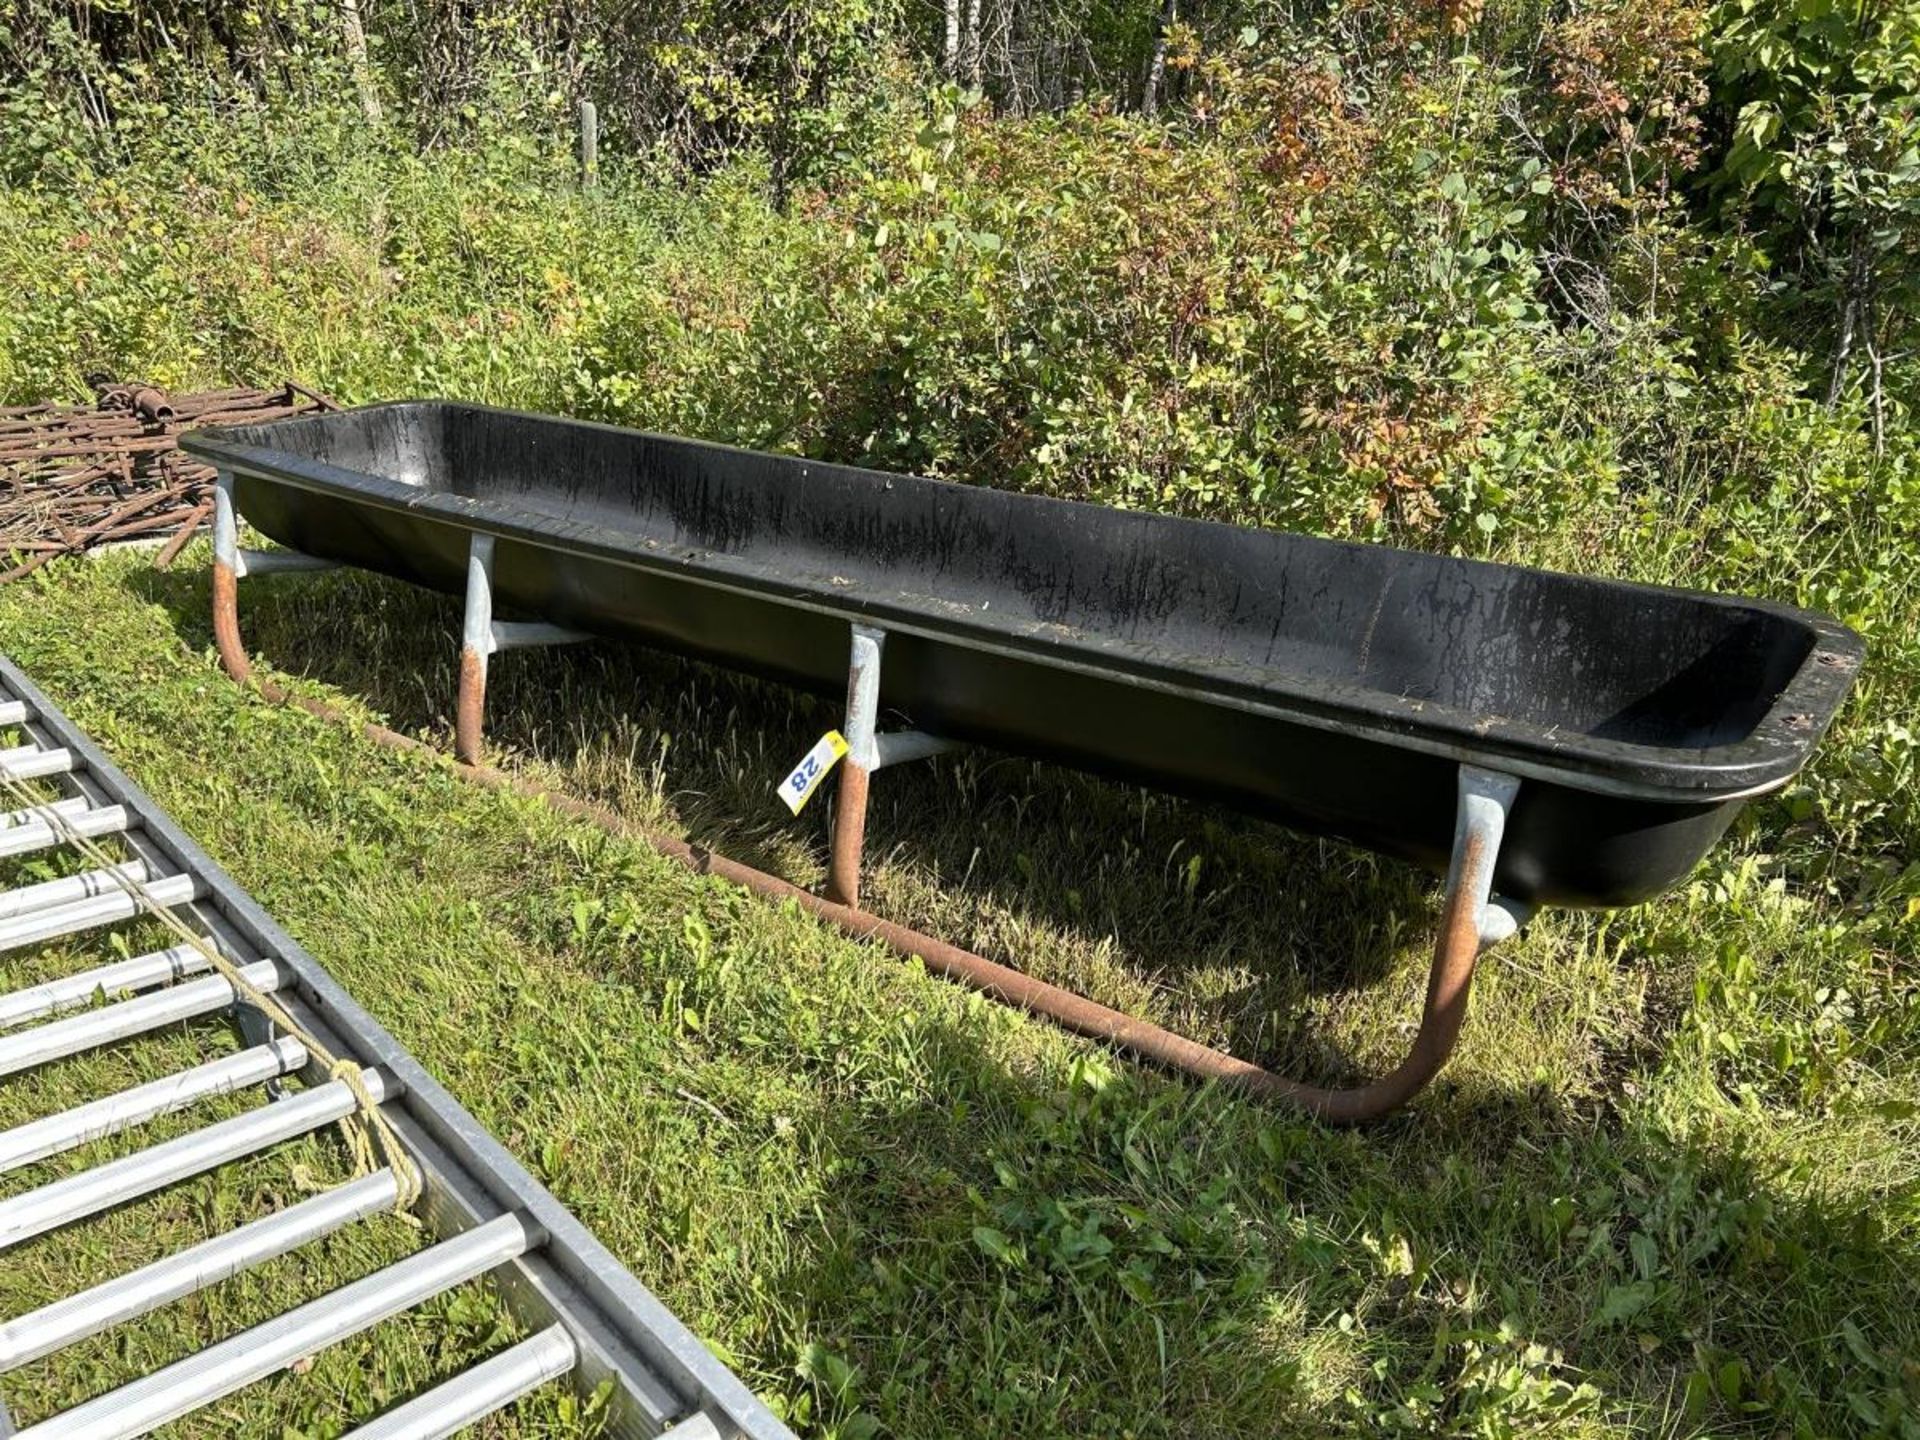 10FT FEED TROUGH